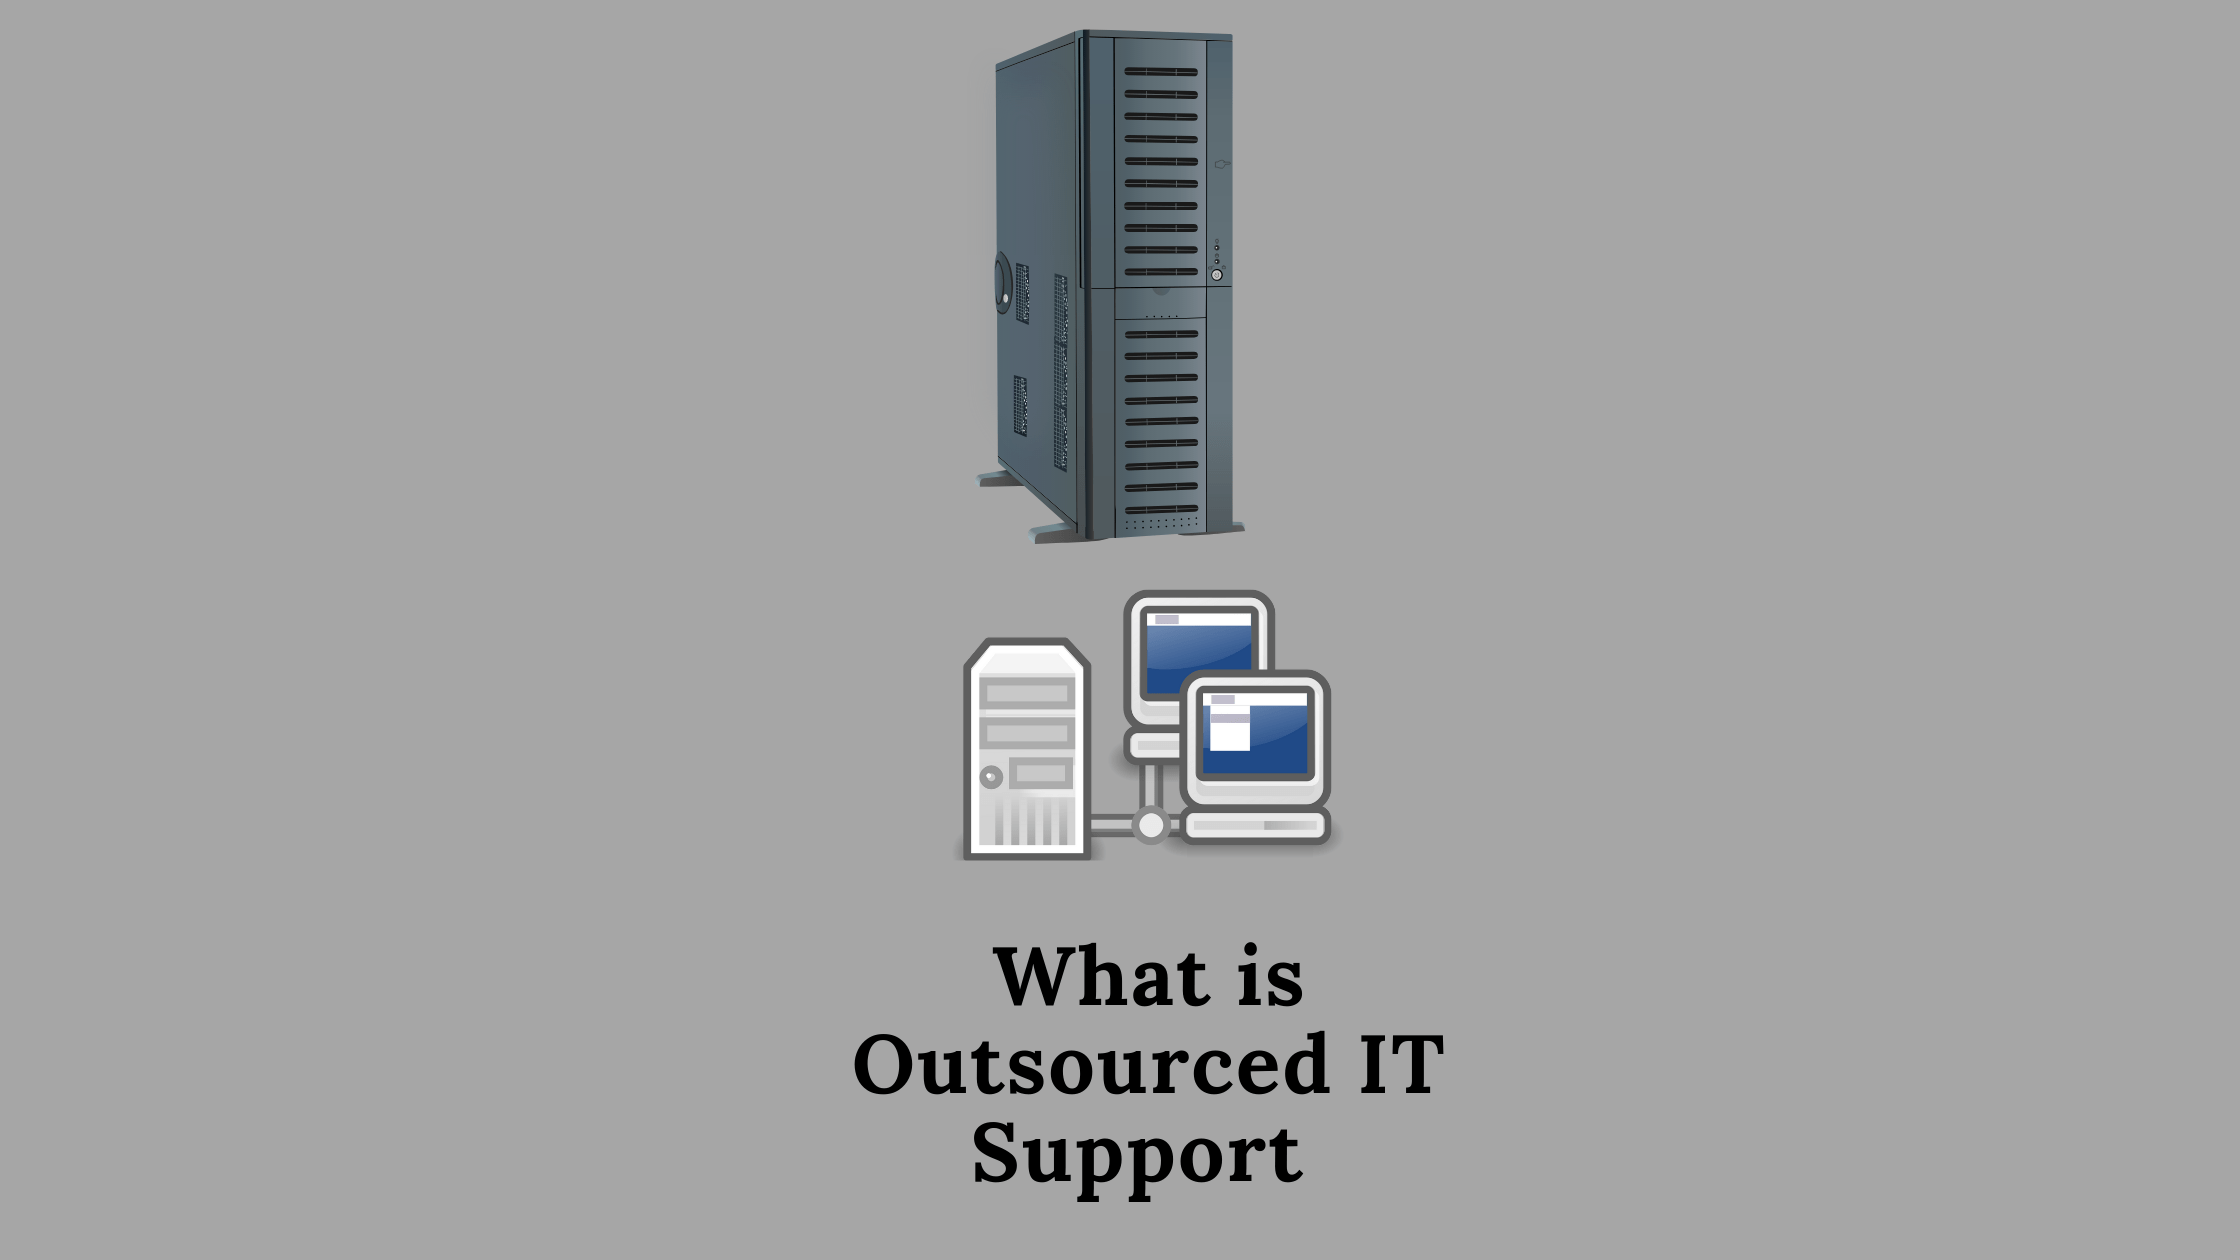 What is Outsourced IT Support